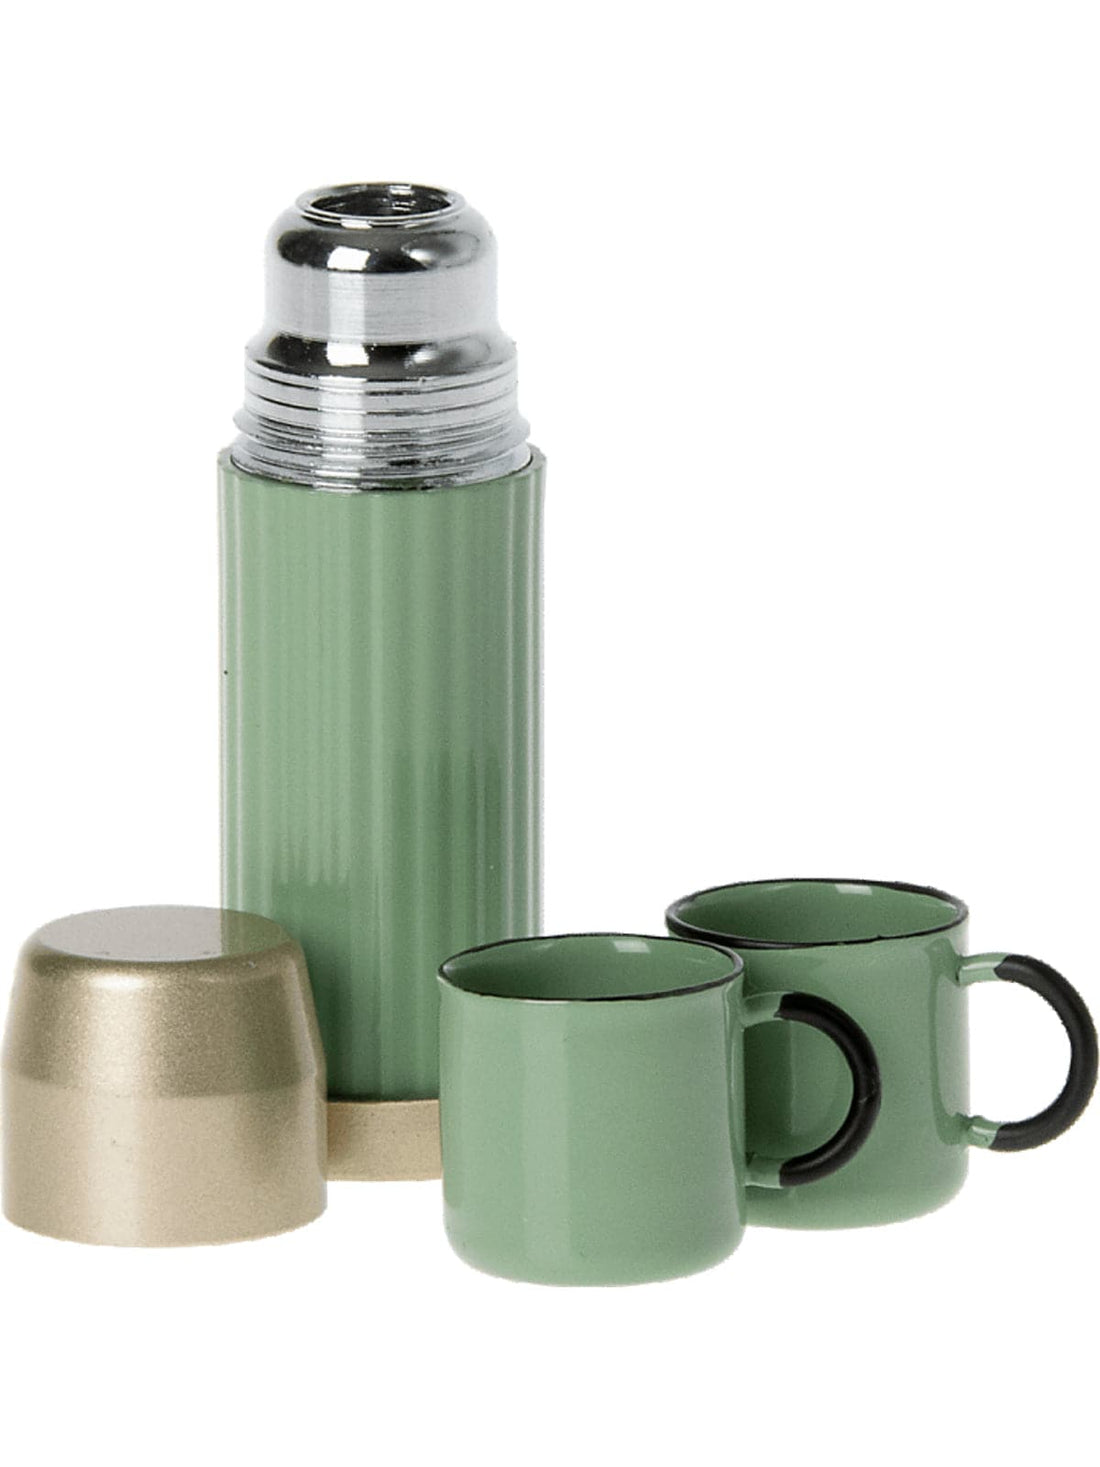 MINIATURE THERMOS AND CUPS